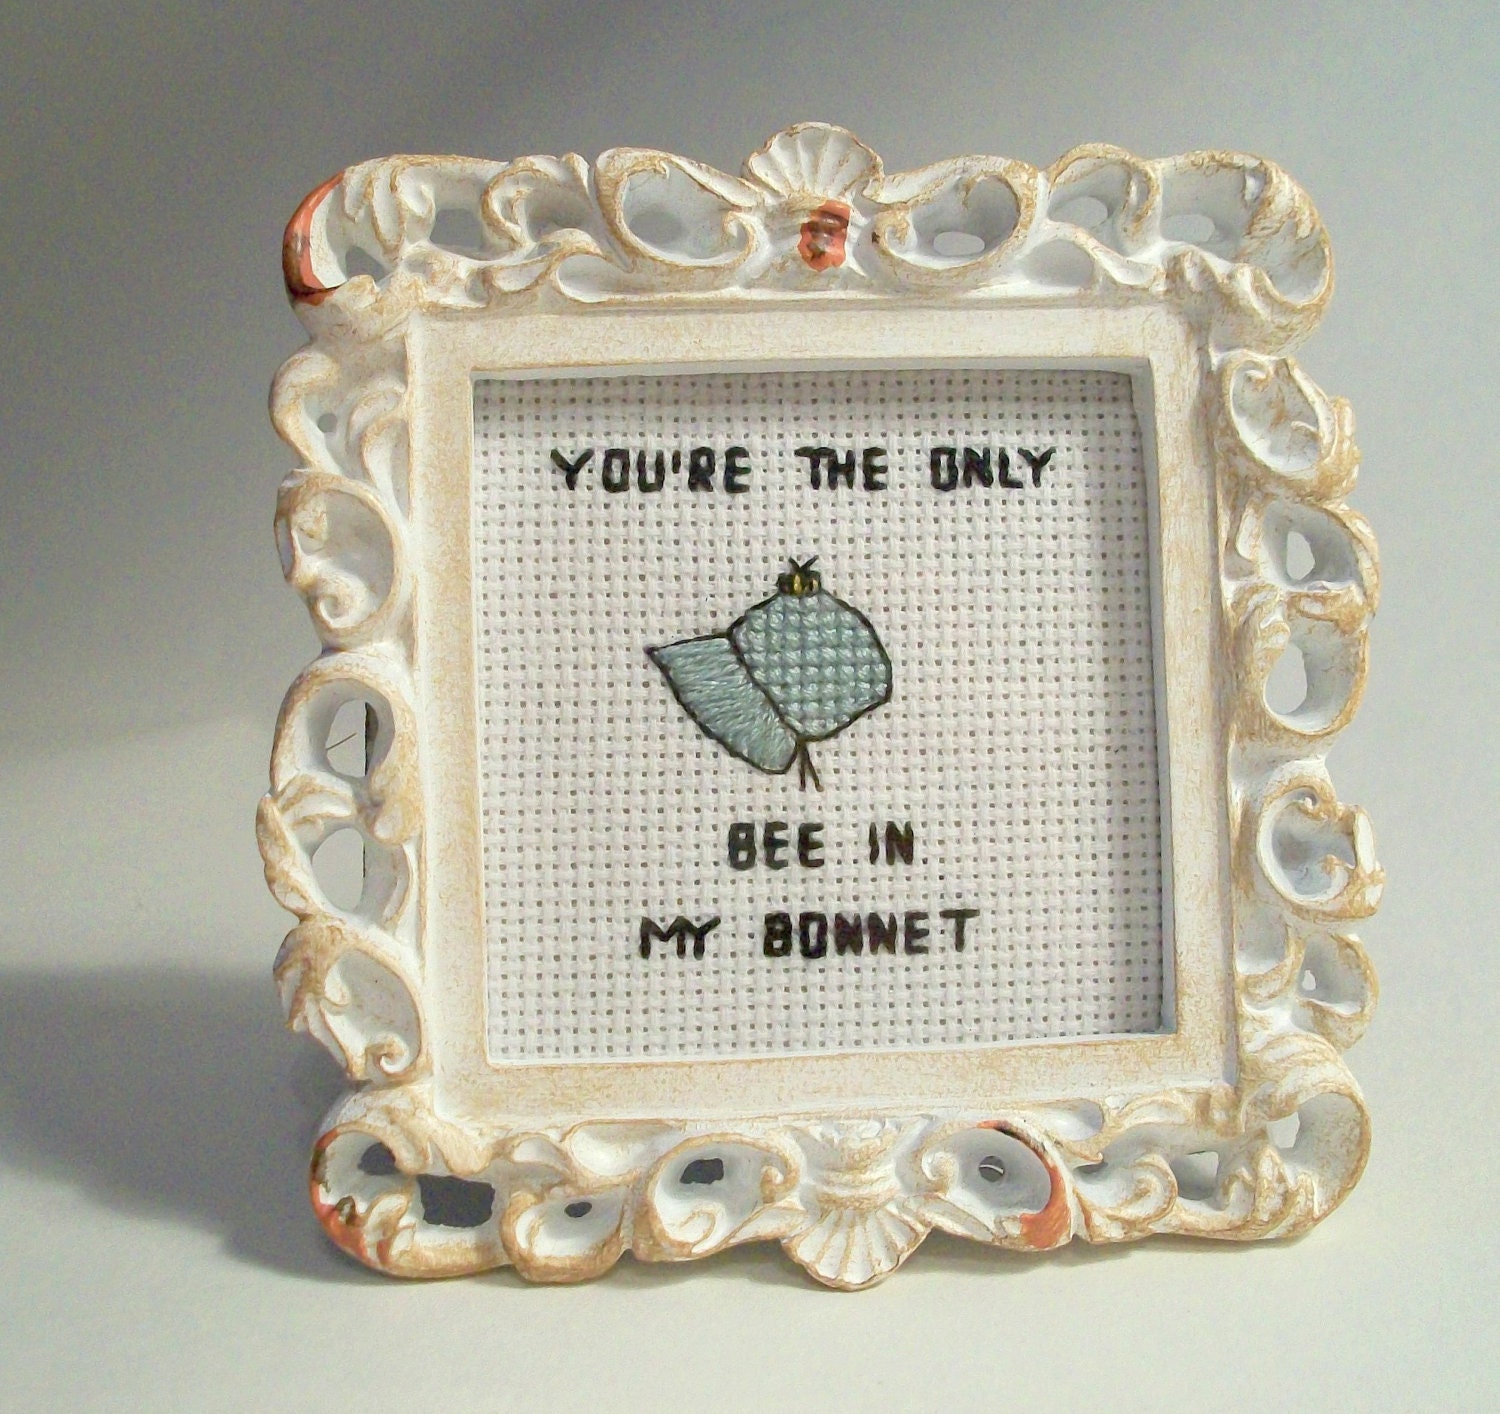 You're the only bee in my bonnet -- TMBG "birdhouse in your soul" lyric in small cross stitch